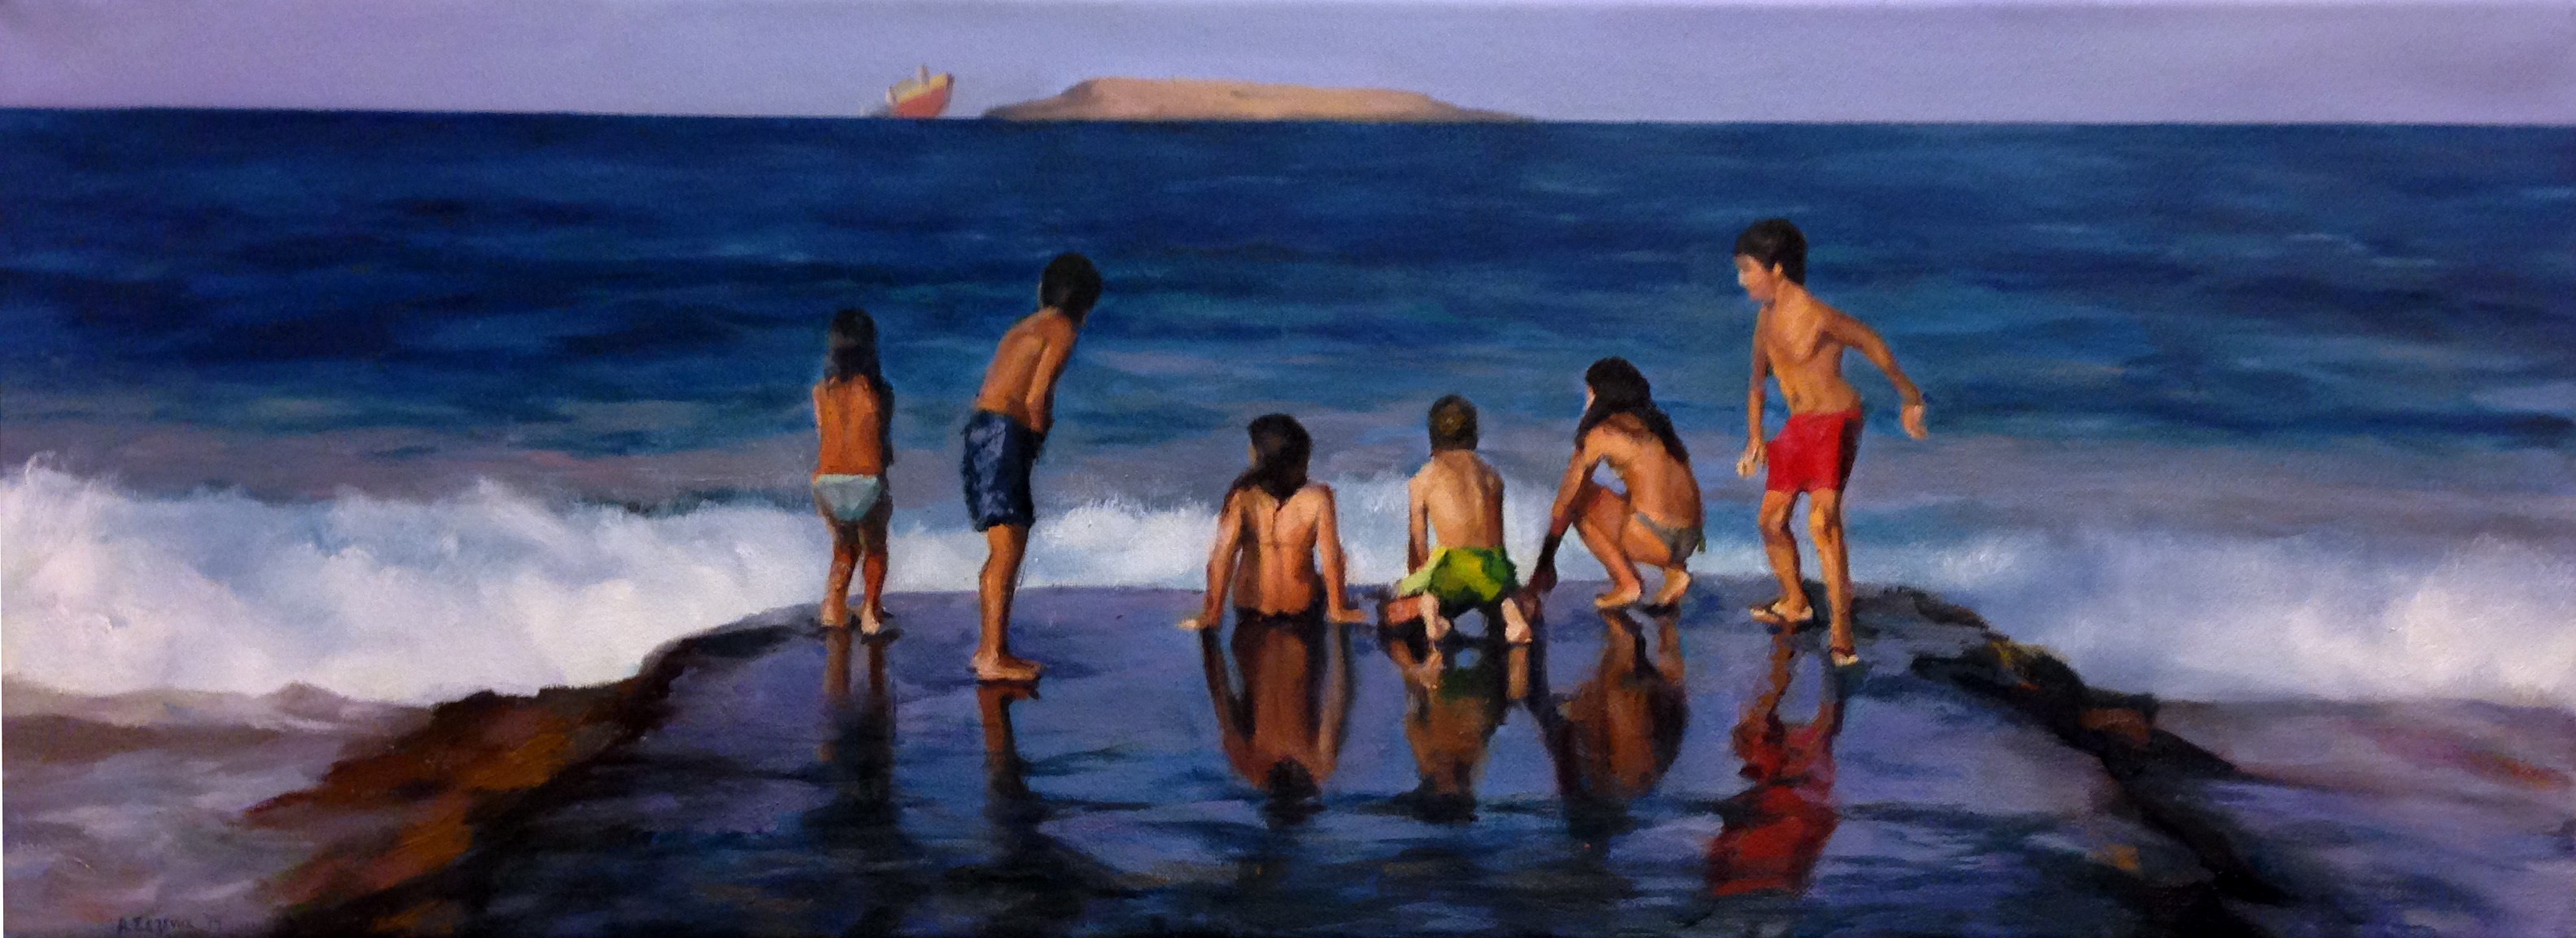 Afroditi Sezenia Playing with the waves 30x100cm oil on canvas